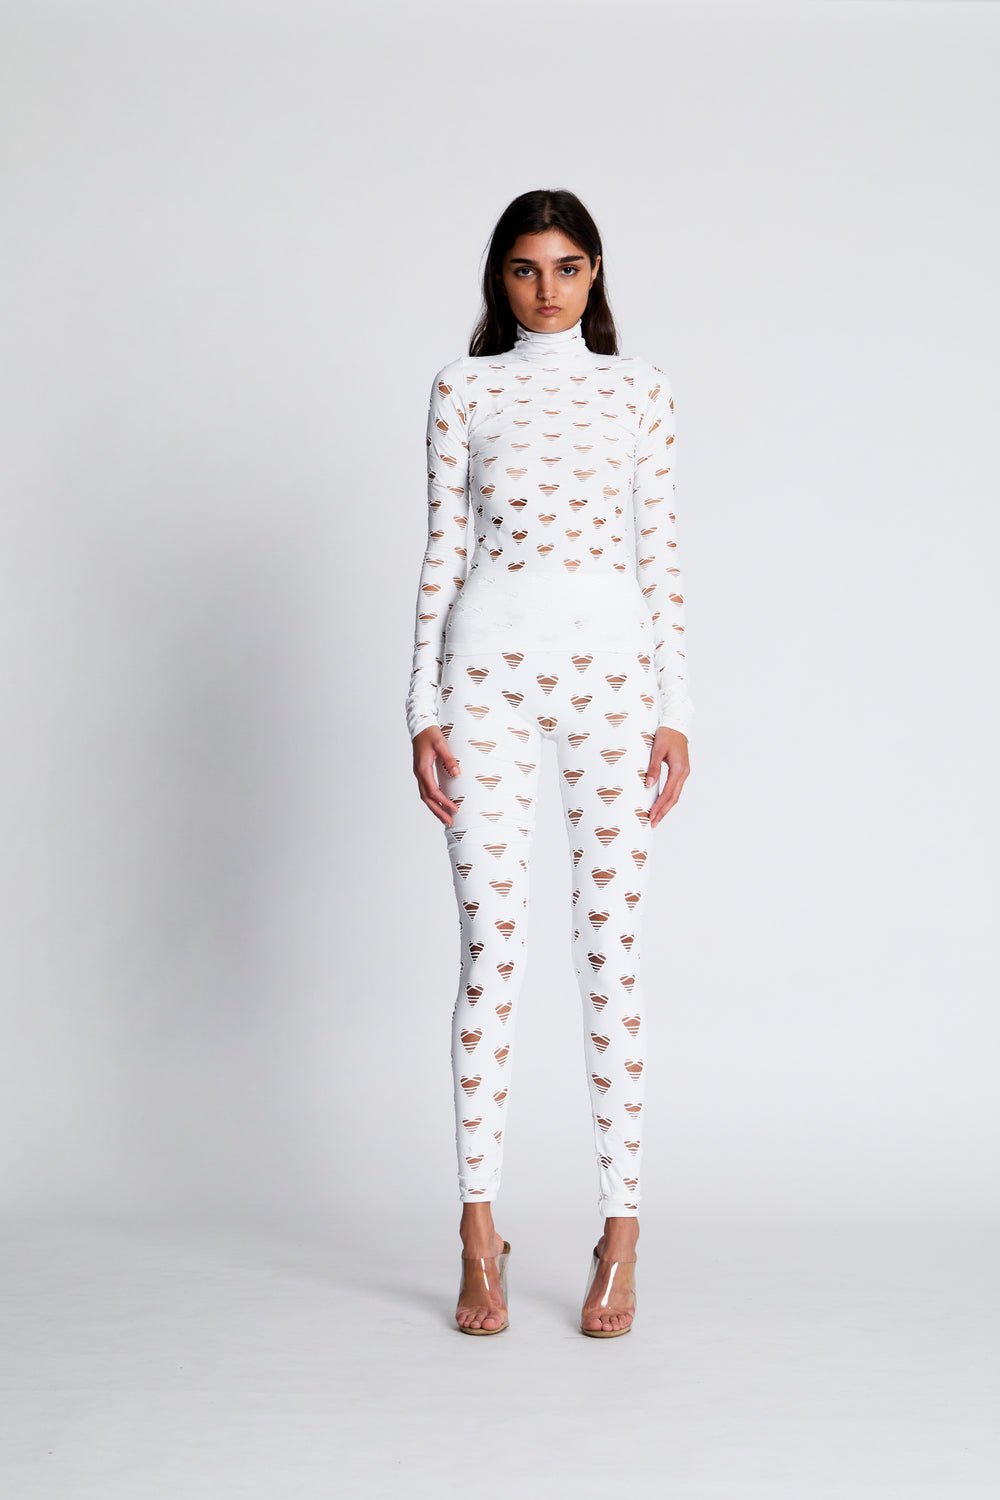 PERFORATED HEART TURTLENECK